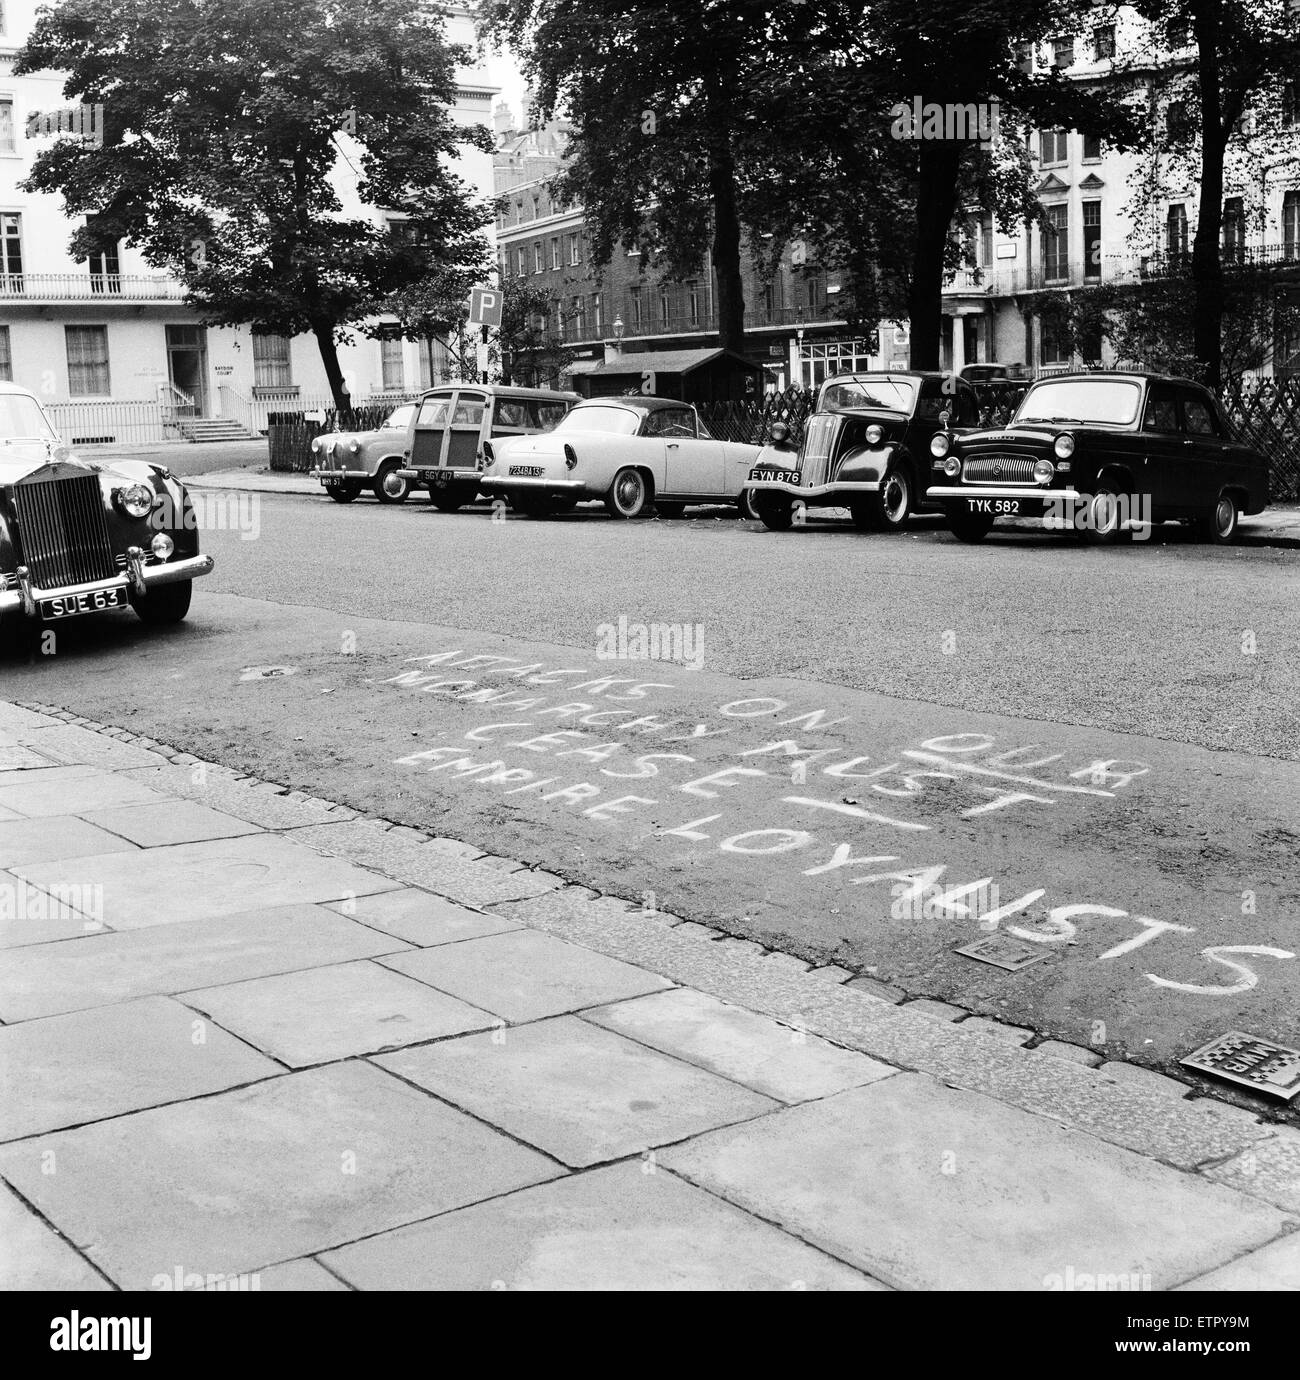 Empire Loyalists paint slogans on homes of the Queen's critics. 18th August 1957. Stock Photo